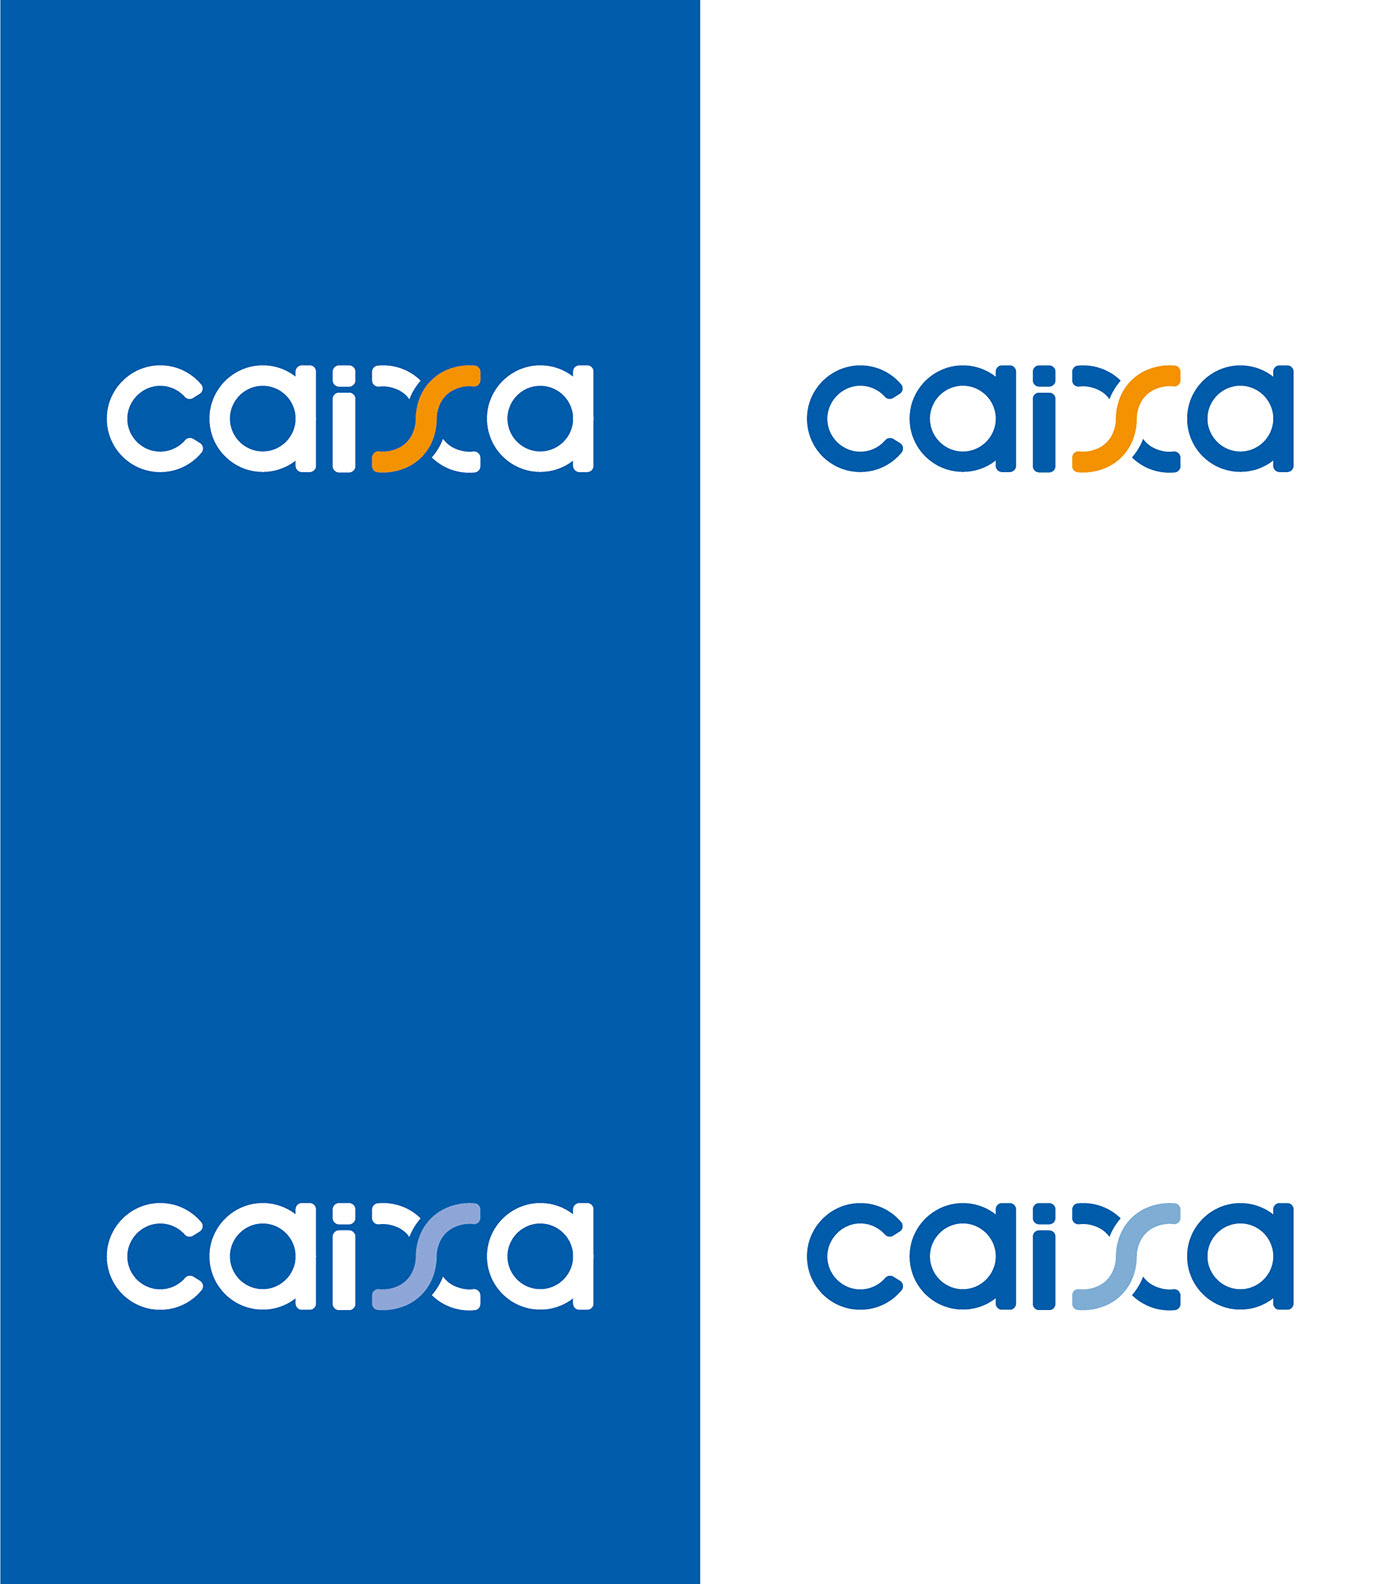 Caixa's logo variation in colors and backgrounds, including monochromatic versions of it